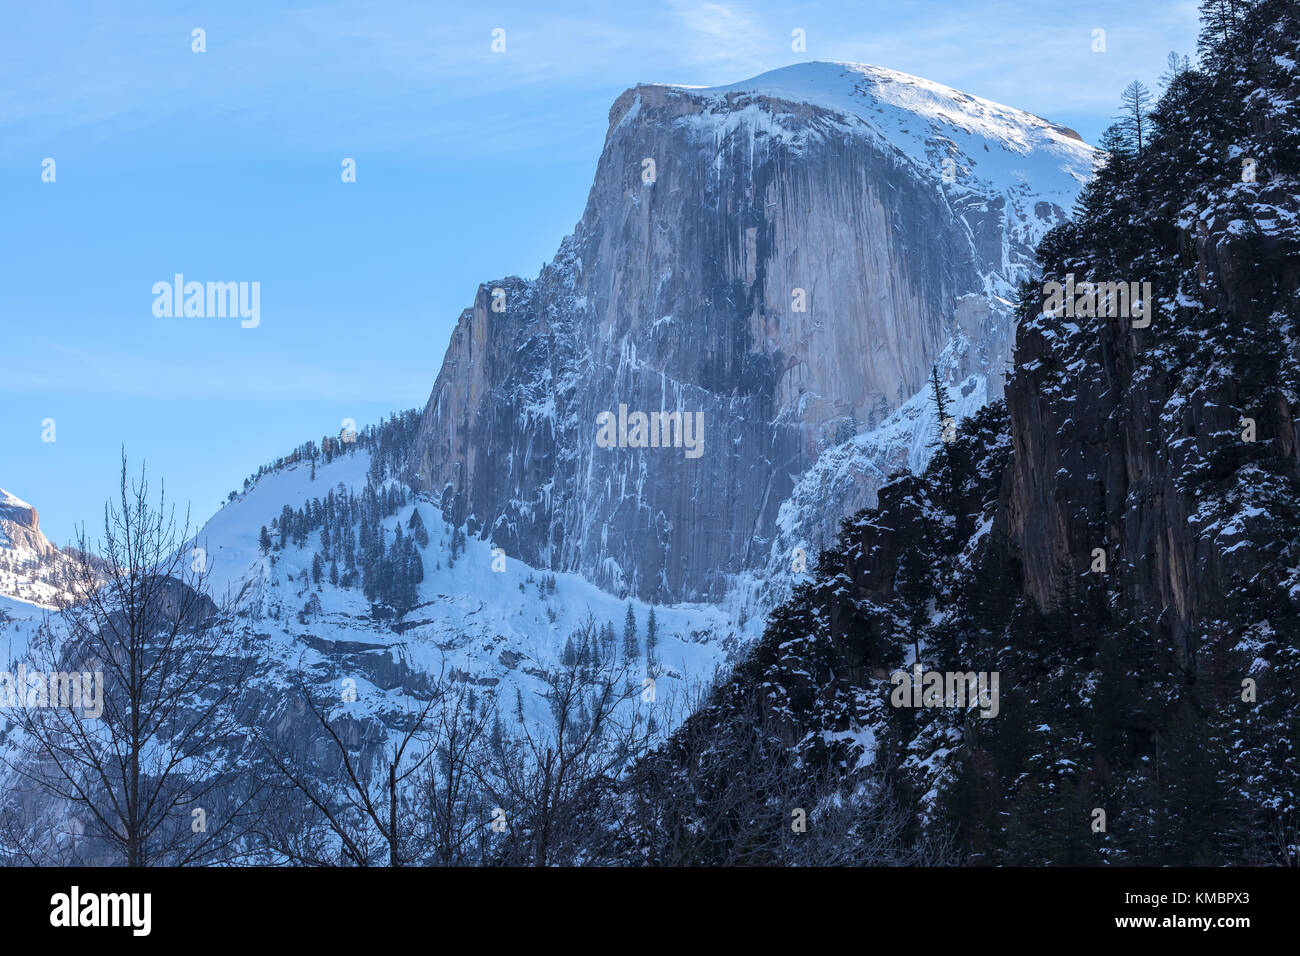 Close up of the snow covered Half Dome, Yosemite National Park, California, United States. Stock Photo